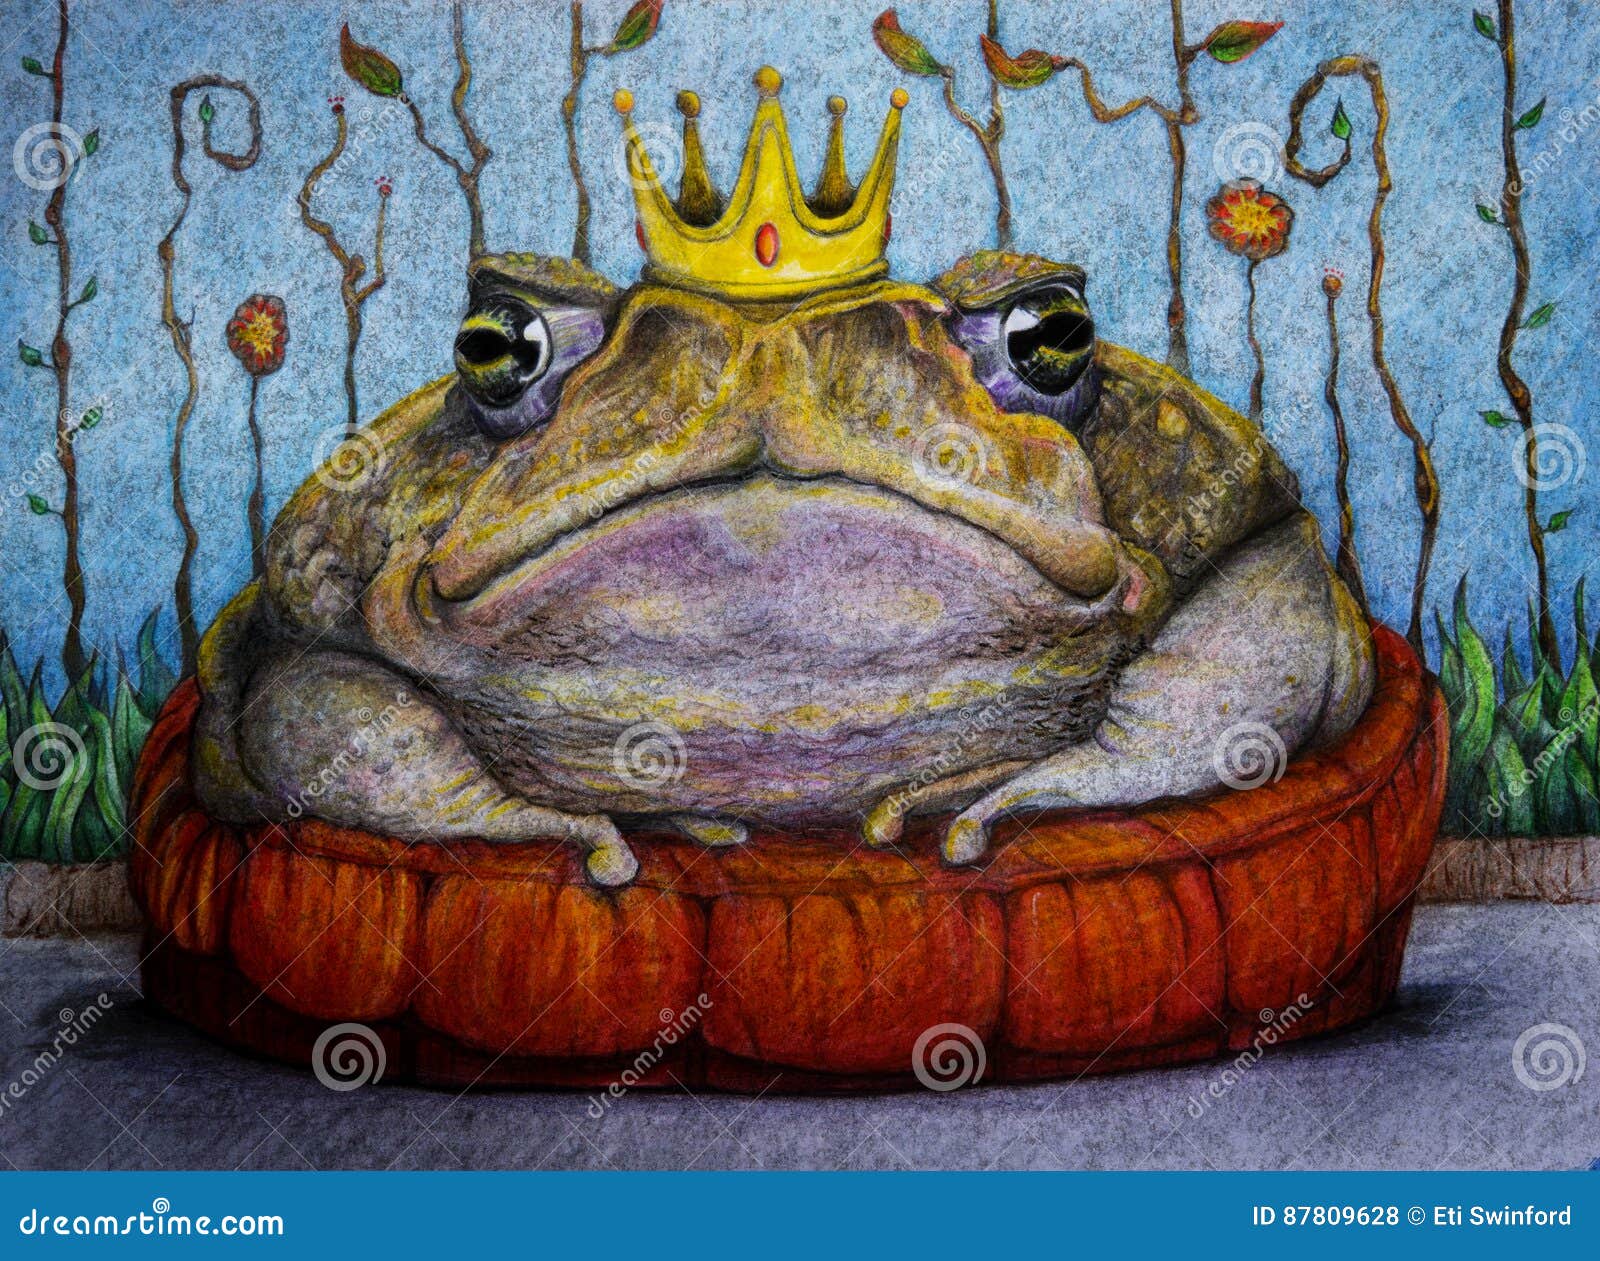 frog prince with crown drawing